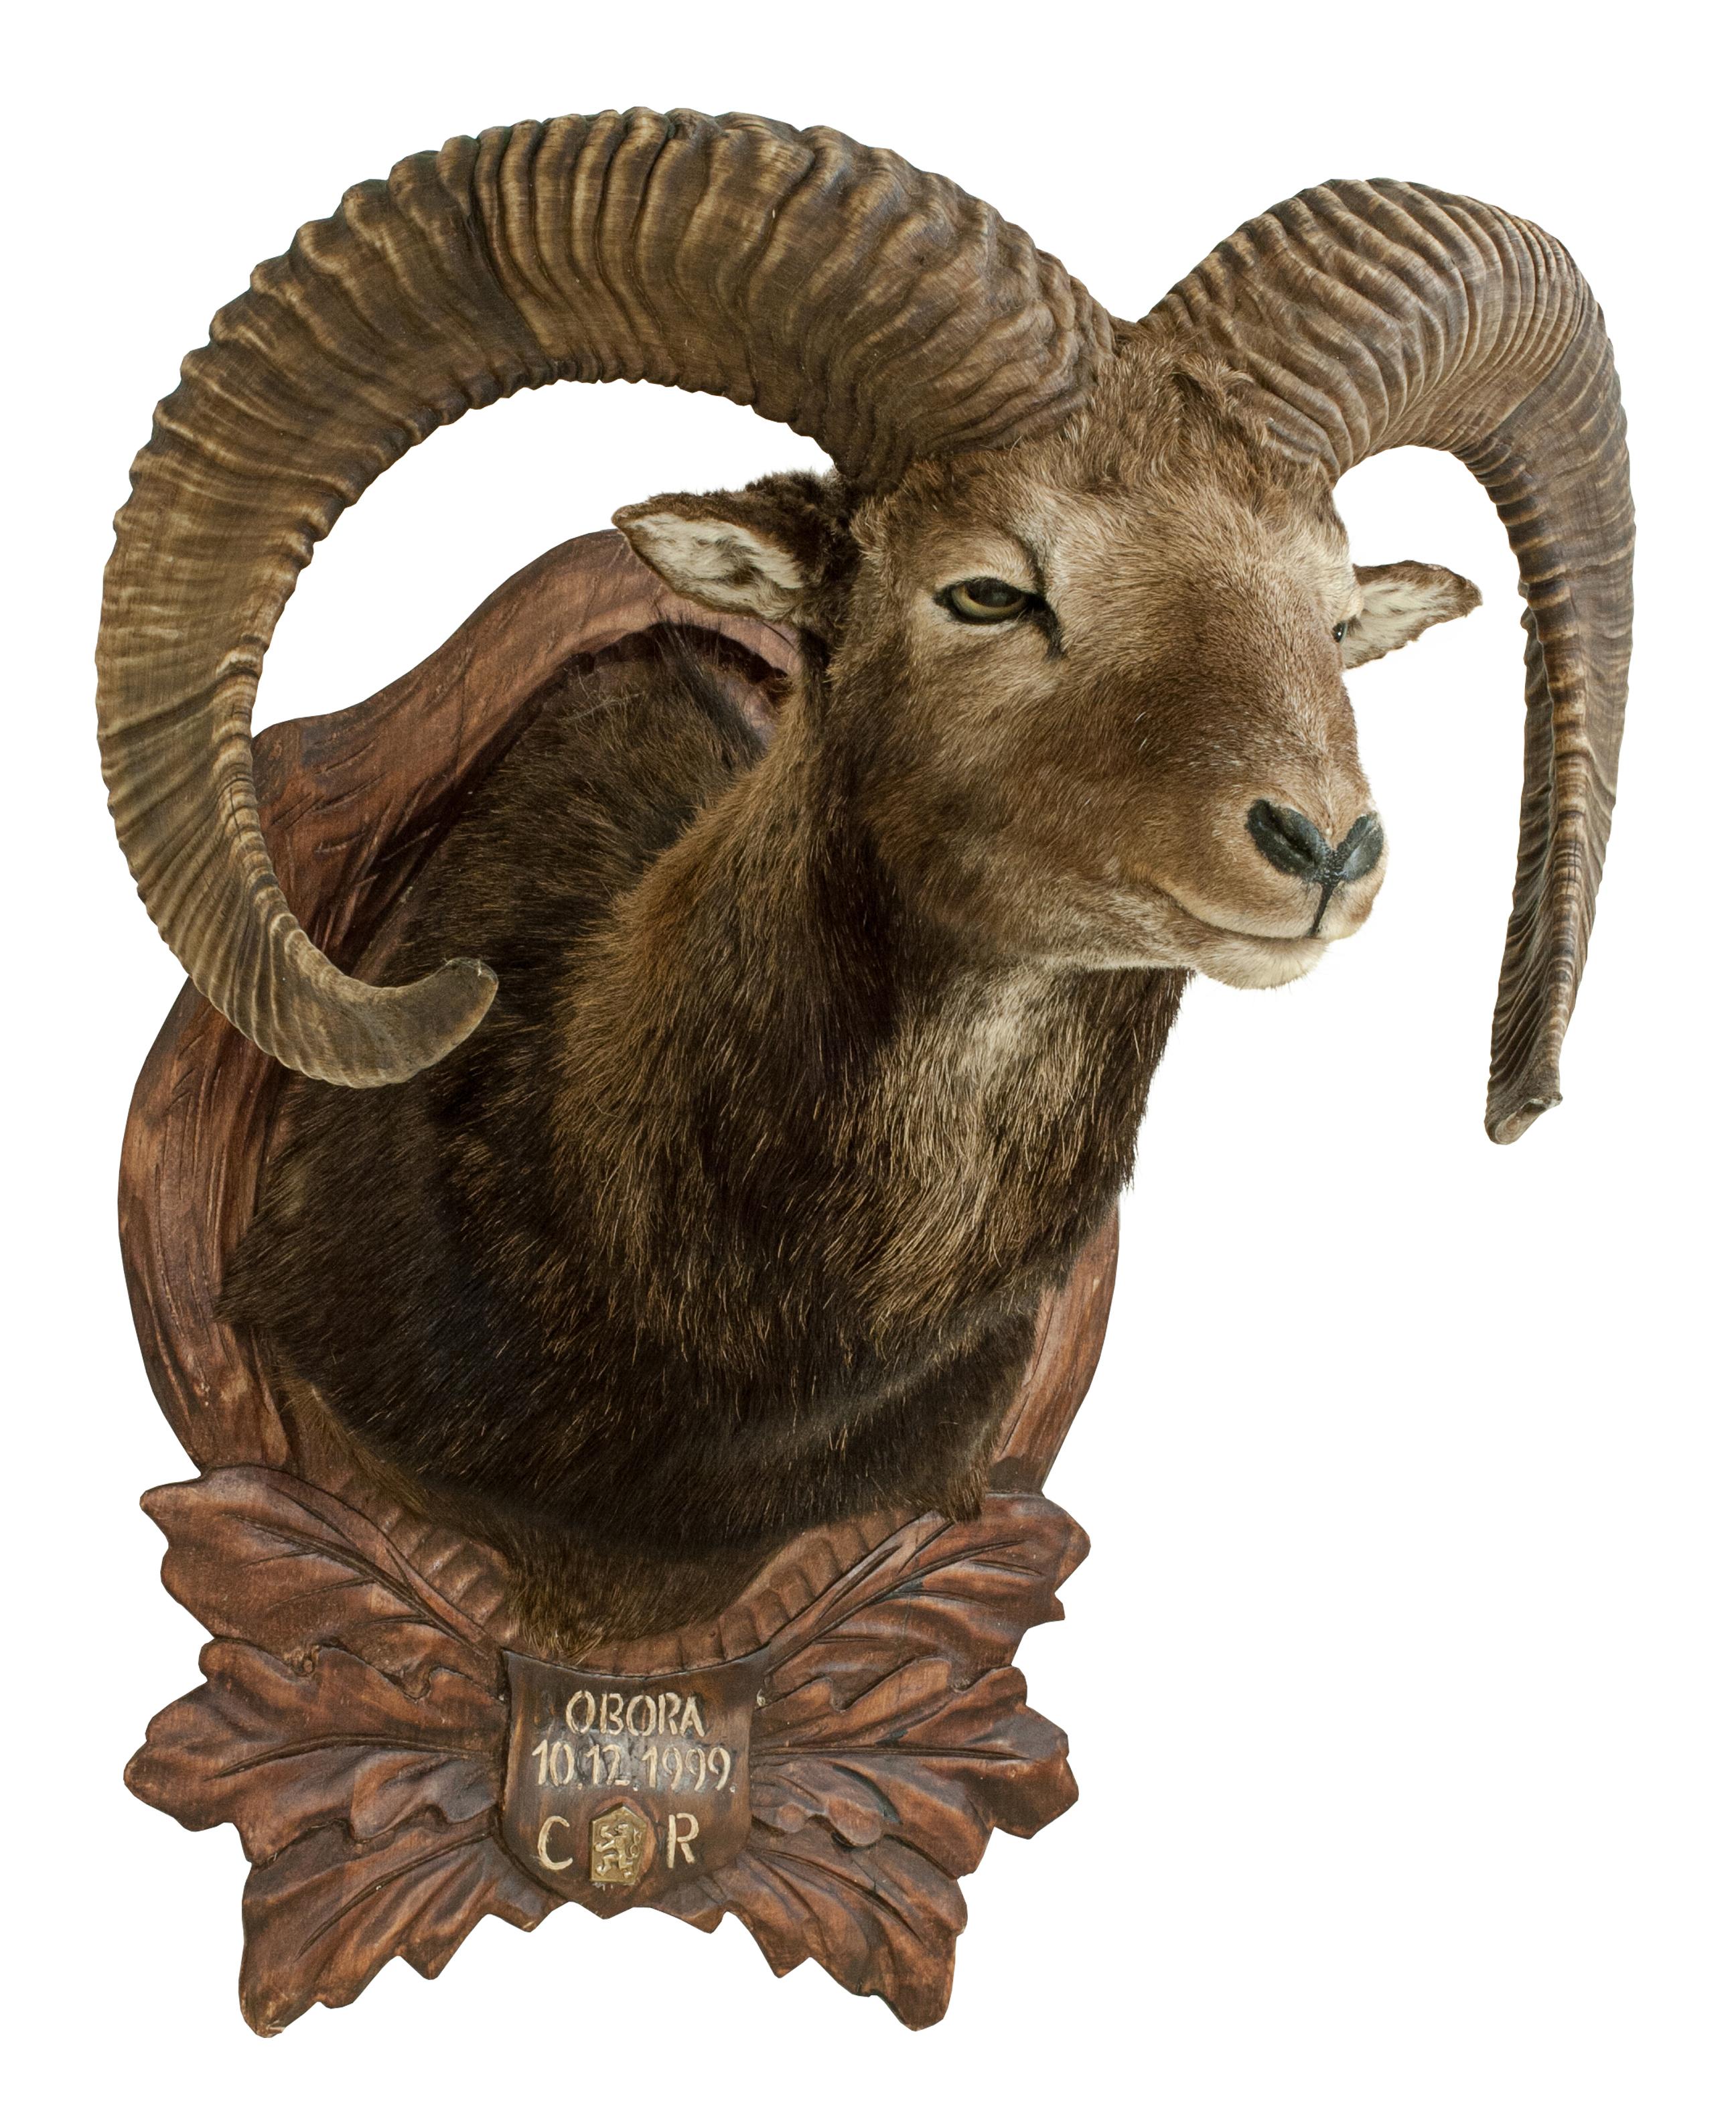 Mounted European Mouflon ram taxidermy shoulder mount.
The Mouflon is mounted onto a wooden shield carved with oak leaves, acorns and a central plaque painted with the inscription 'OBORA, 10.12.1999, CR'. The inscription has been painted over an